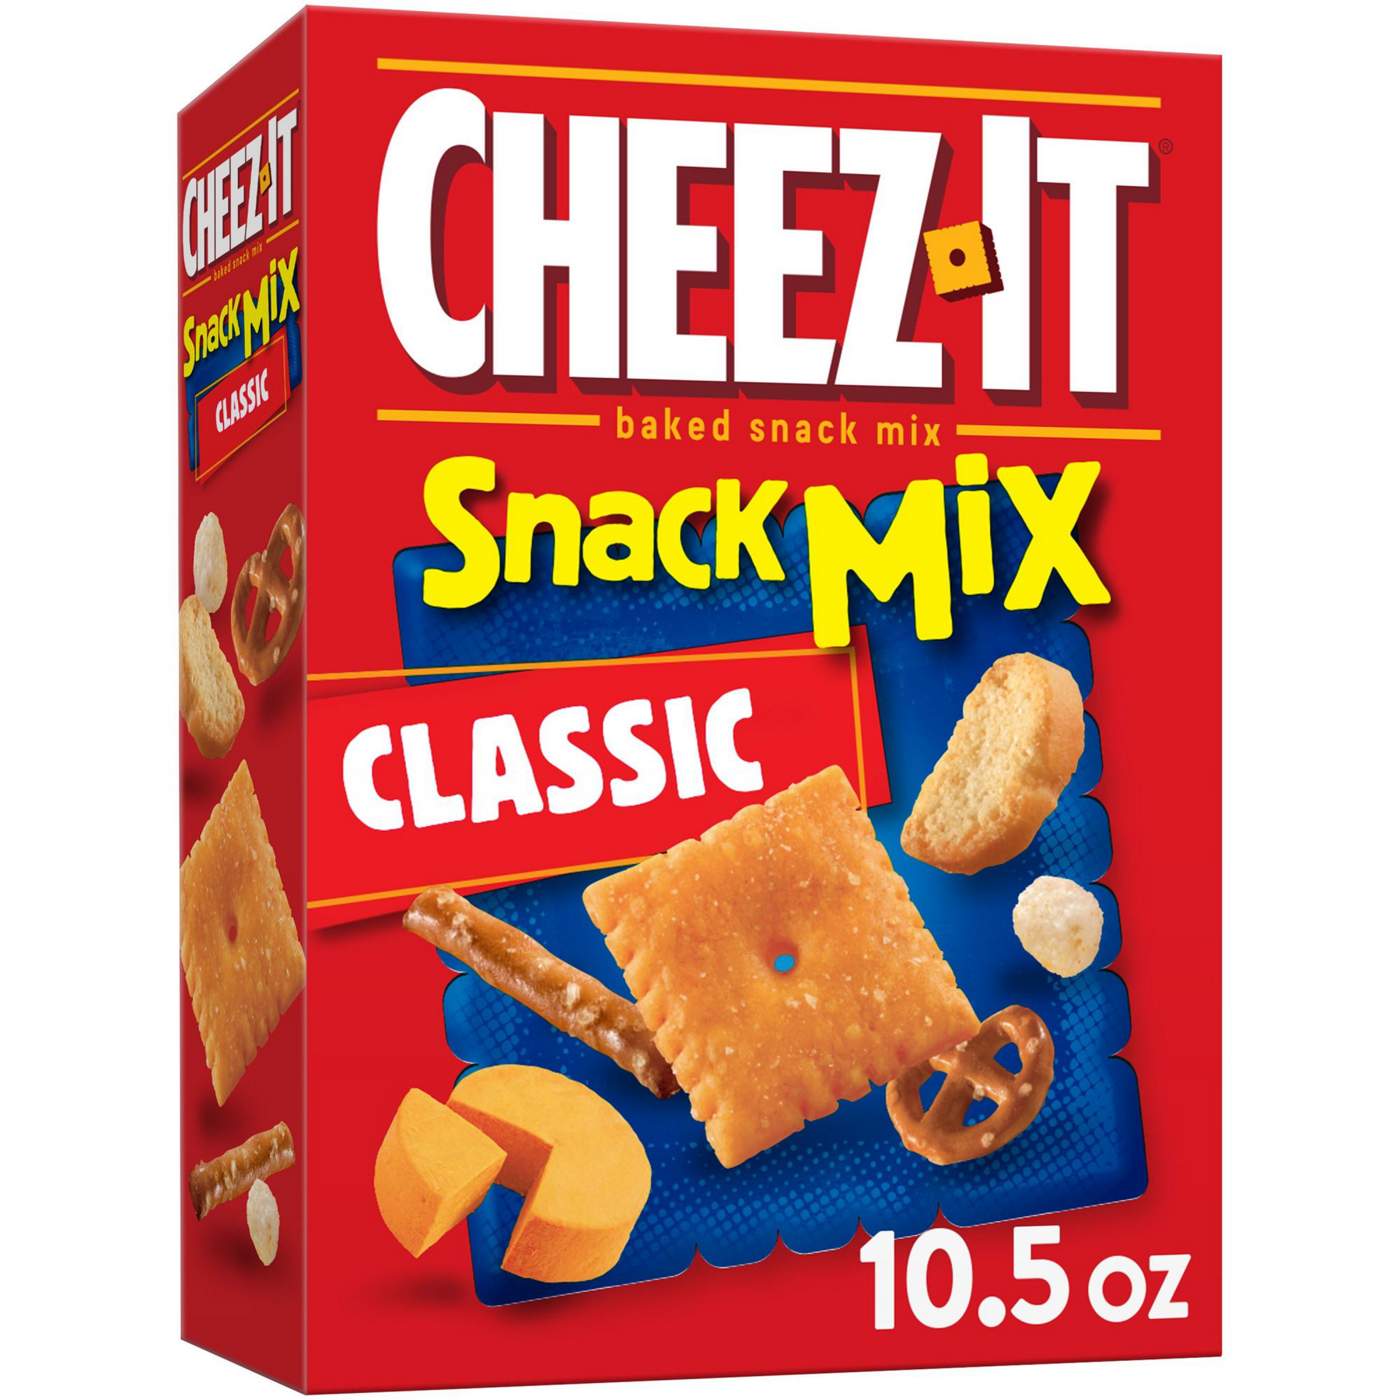 Cheez-It Classic Snack Mix; image 2 of 6